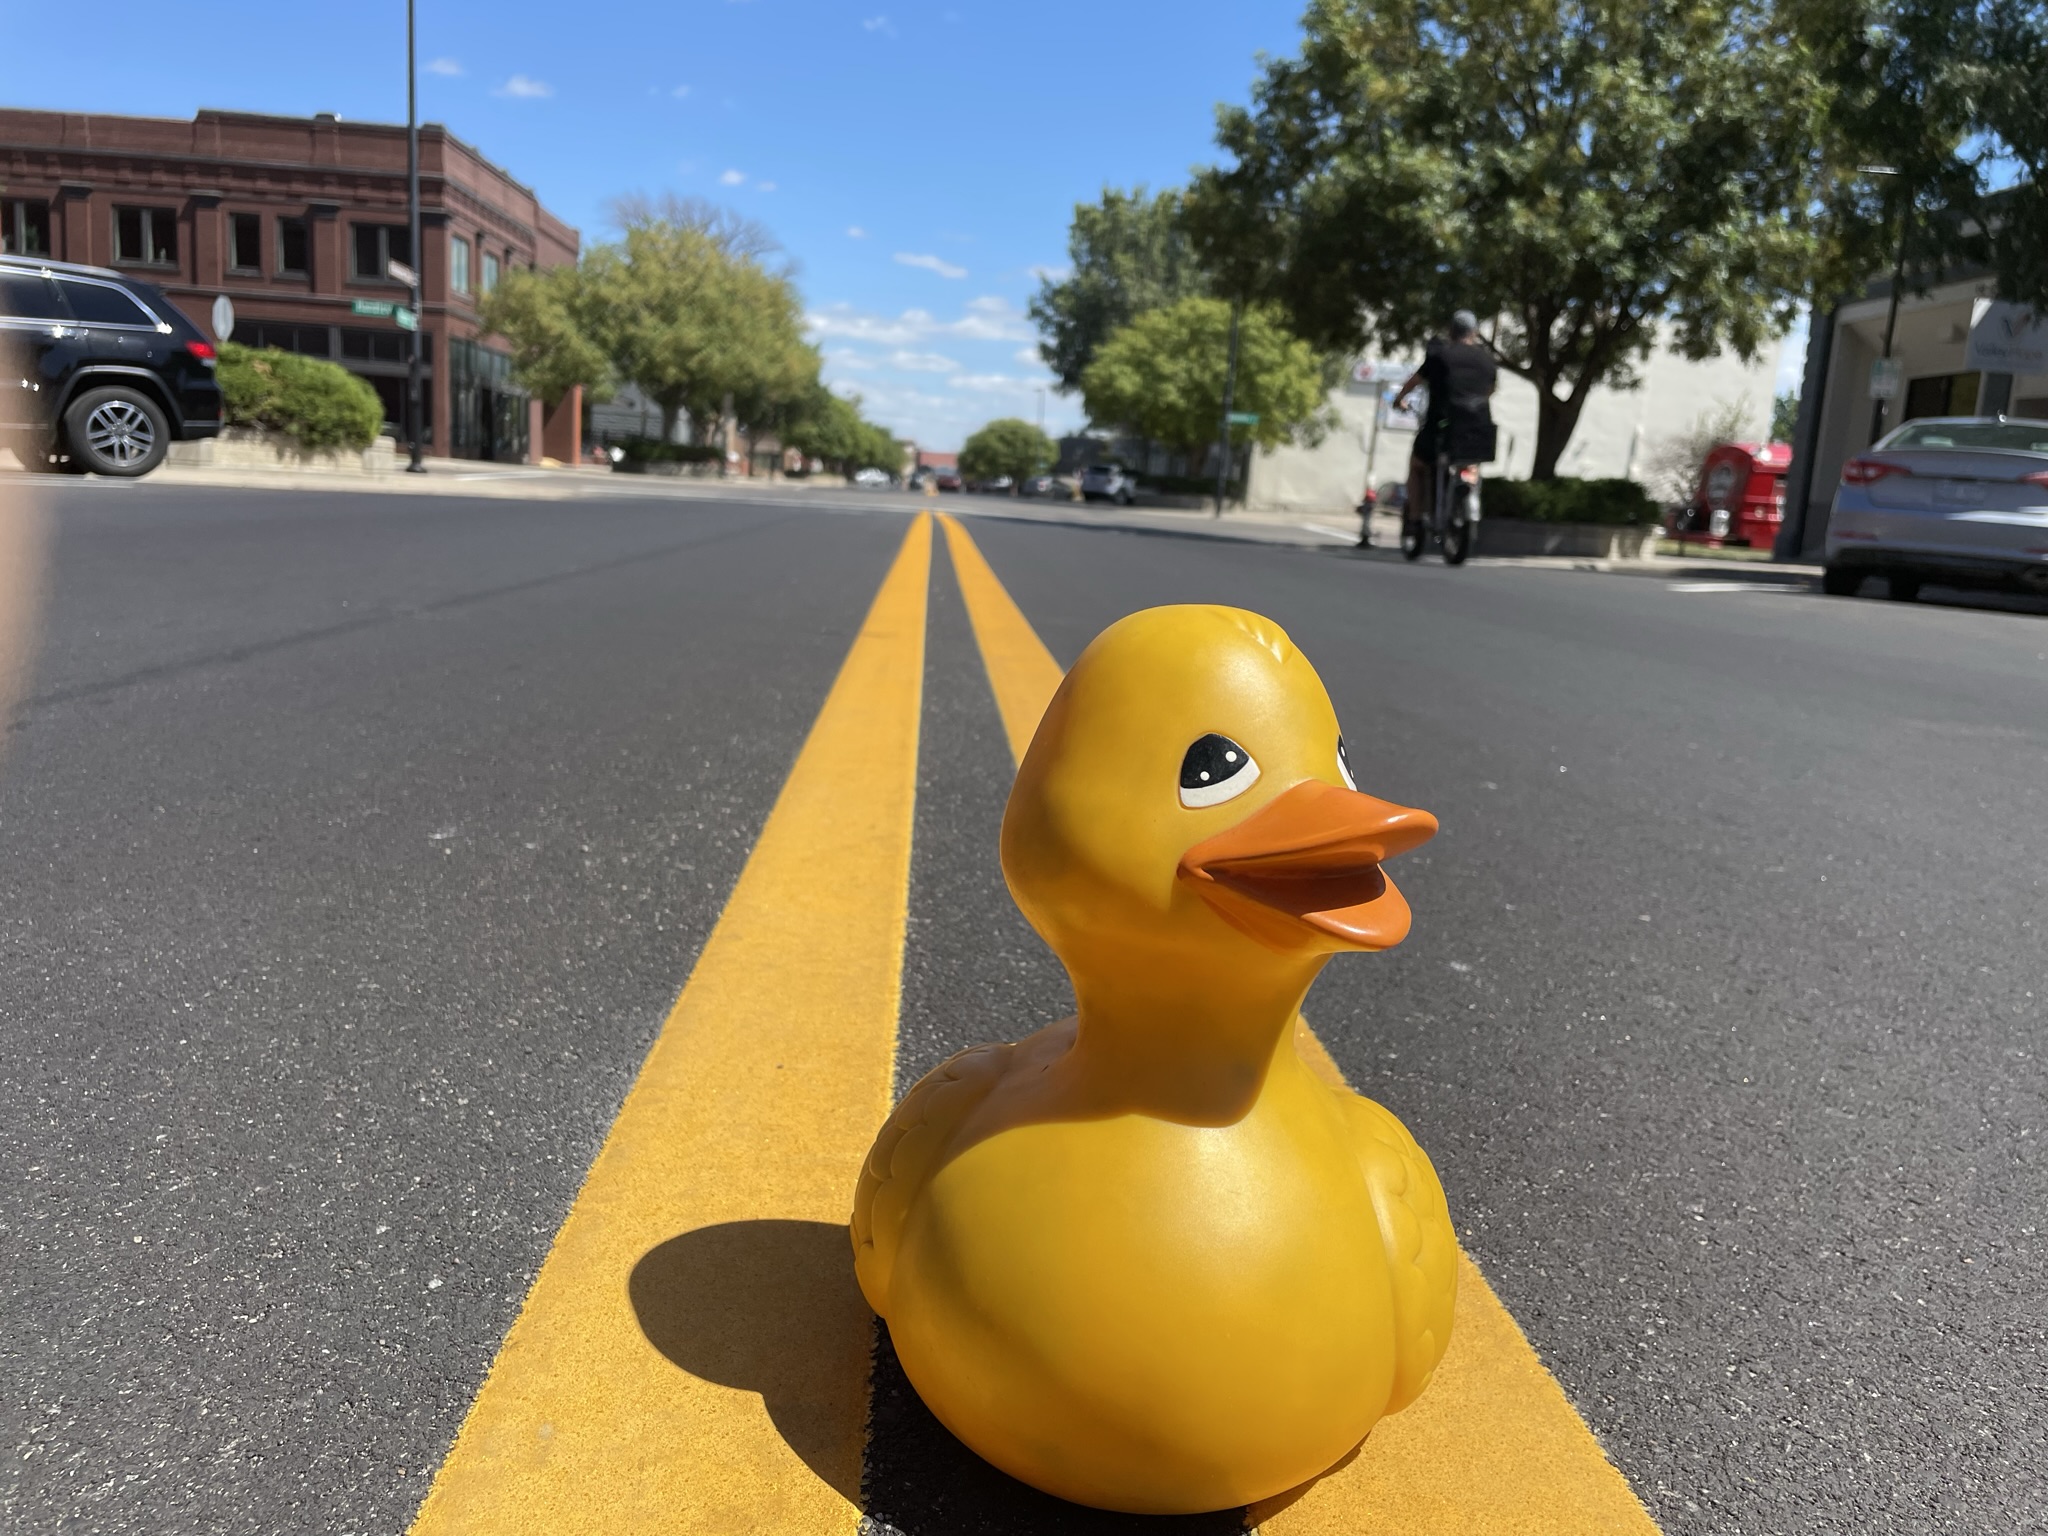 The Ducking Images, Fall 2022 Edition 53